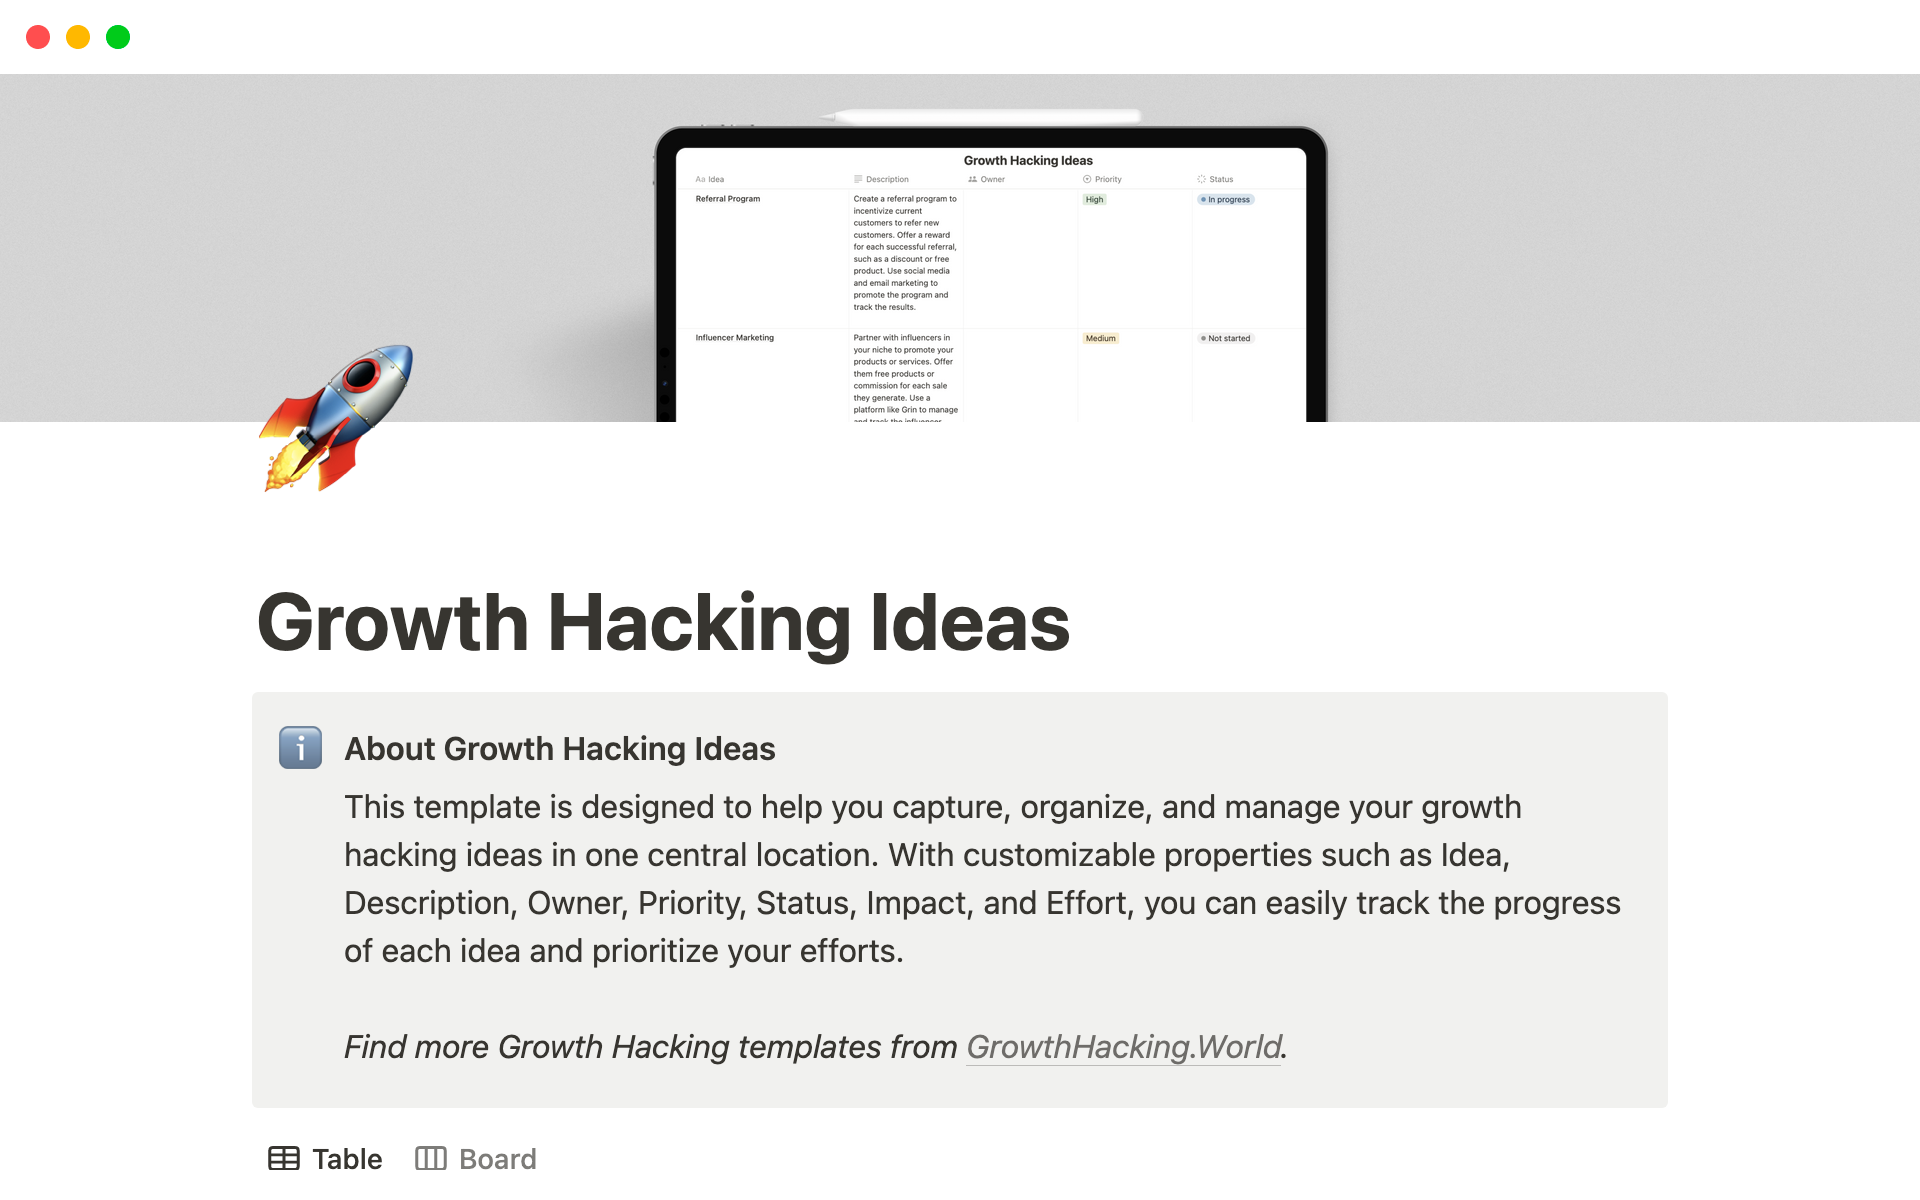 The Growth Hacking Ideas Notion template helps you capture, organize, and manage your growth hacking ideas in one central location.